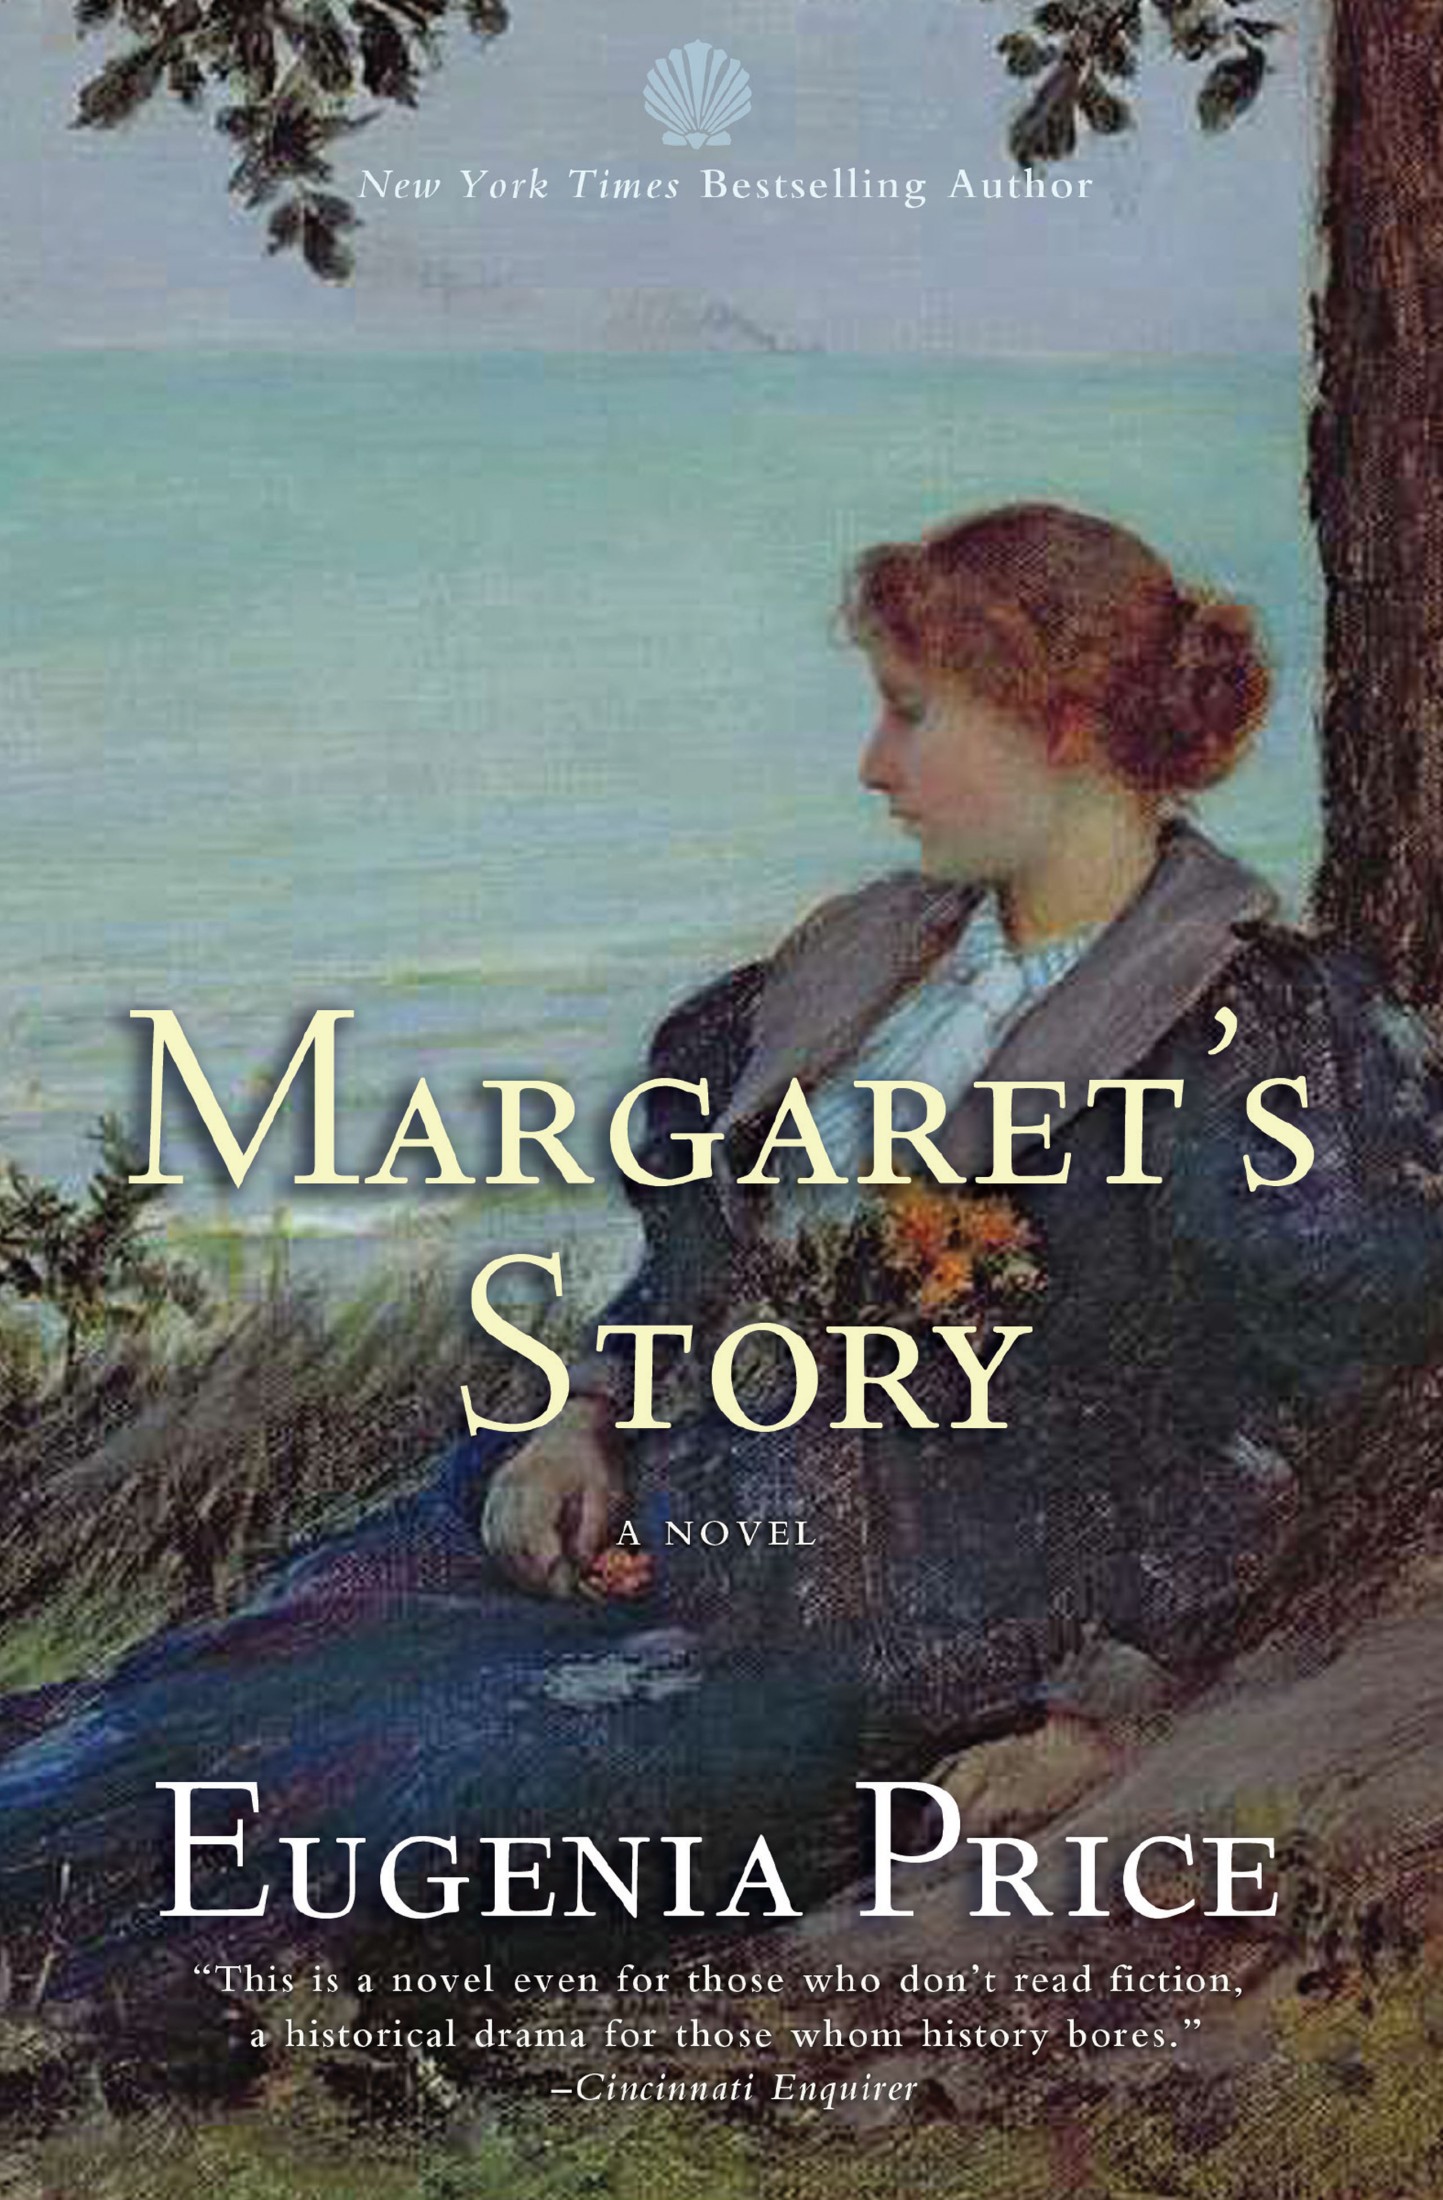 Margaret's Story (The Florida Trilogy #3)